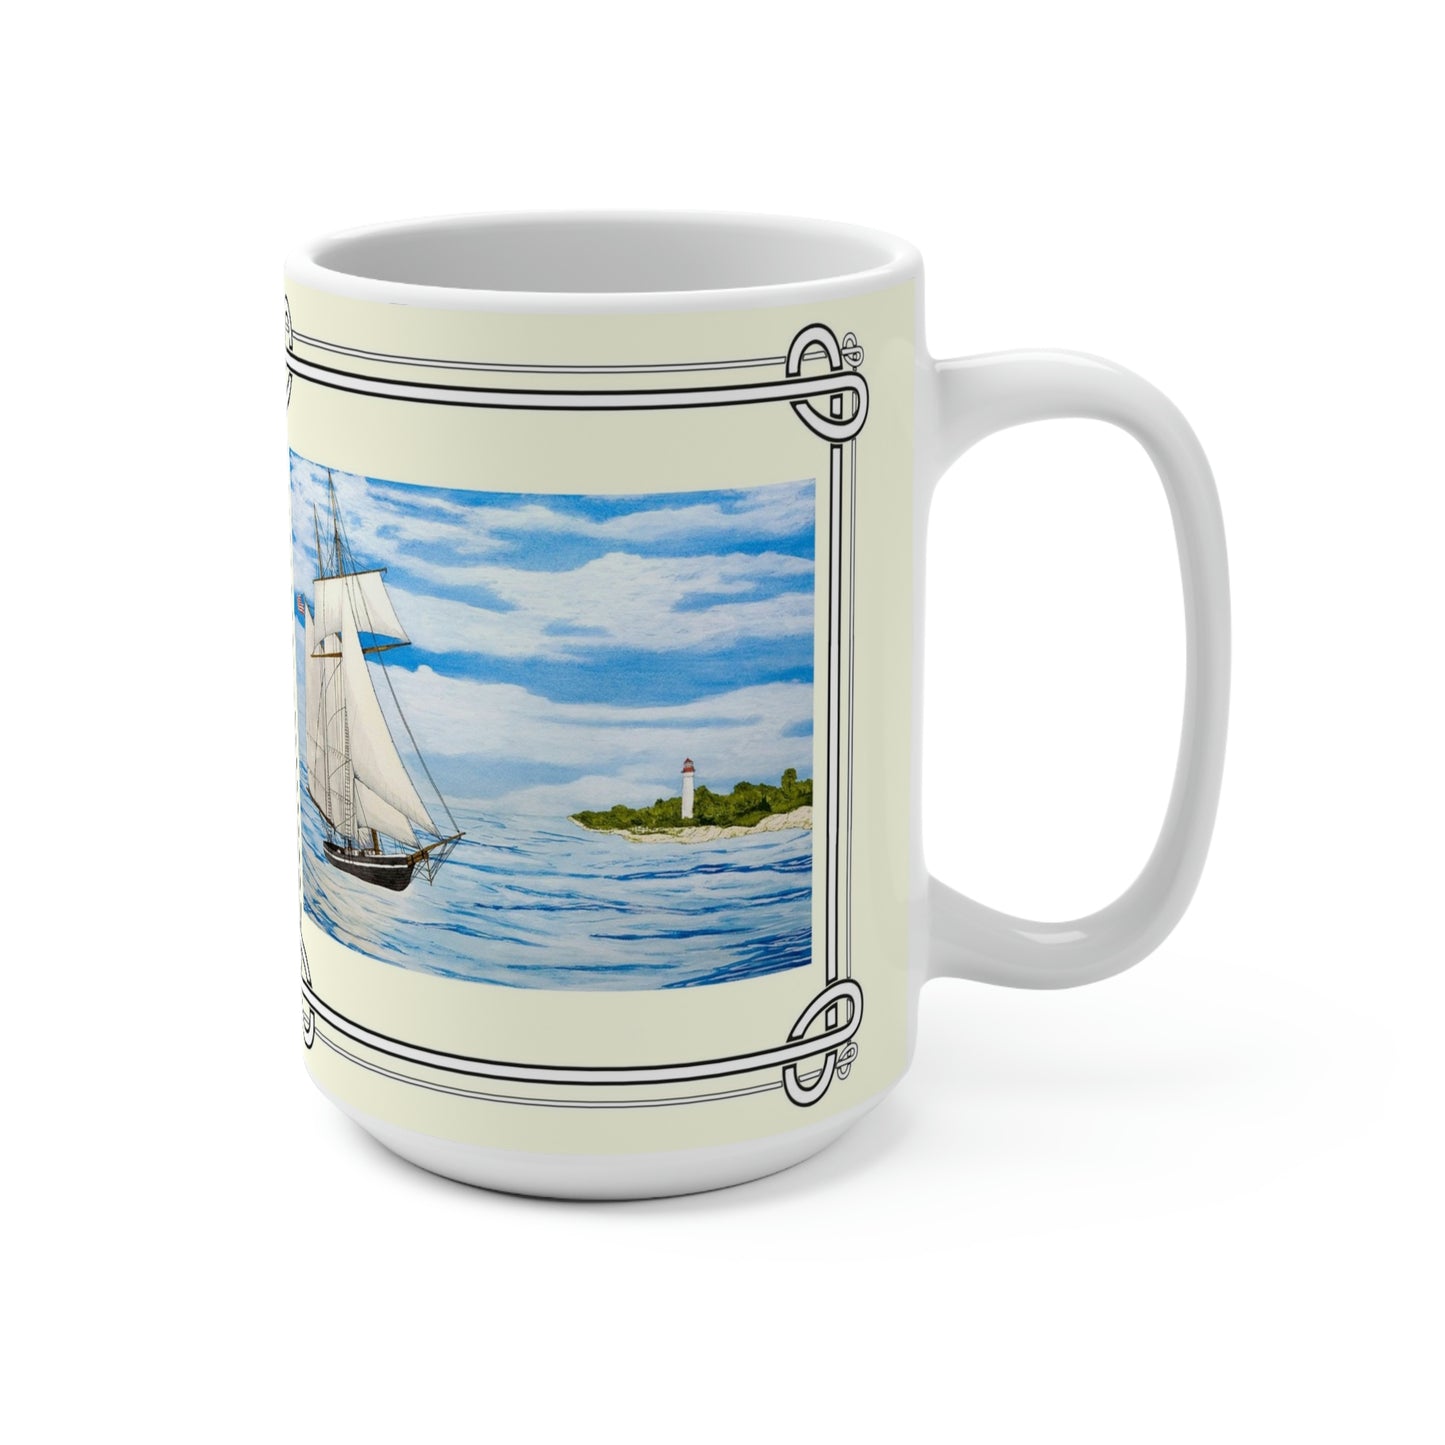 Pleasant Breeze Off Cape May features a small topsail schooner as it enters the Delaware Bay and rounds the point in view of the Cape May, New Jersey Lighthouse. The mug design is a reproduction of an original watercolor by Lee M. Buchanan and has the image on the front and back of the mug.